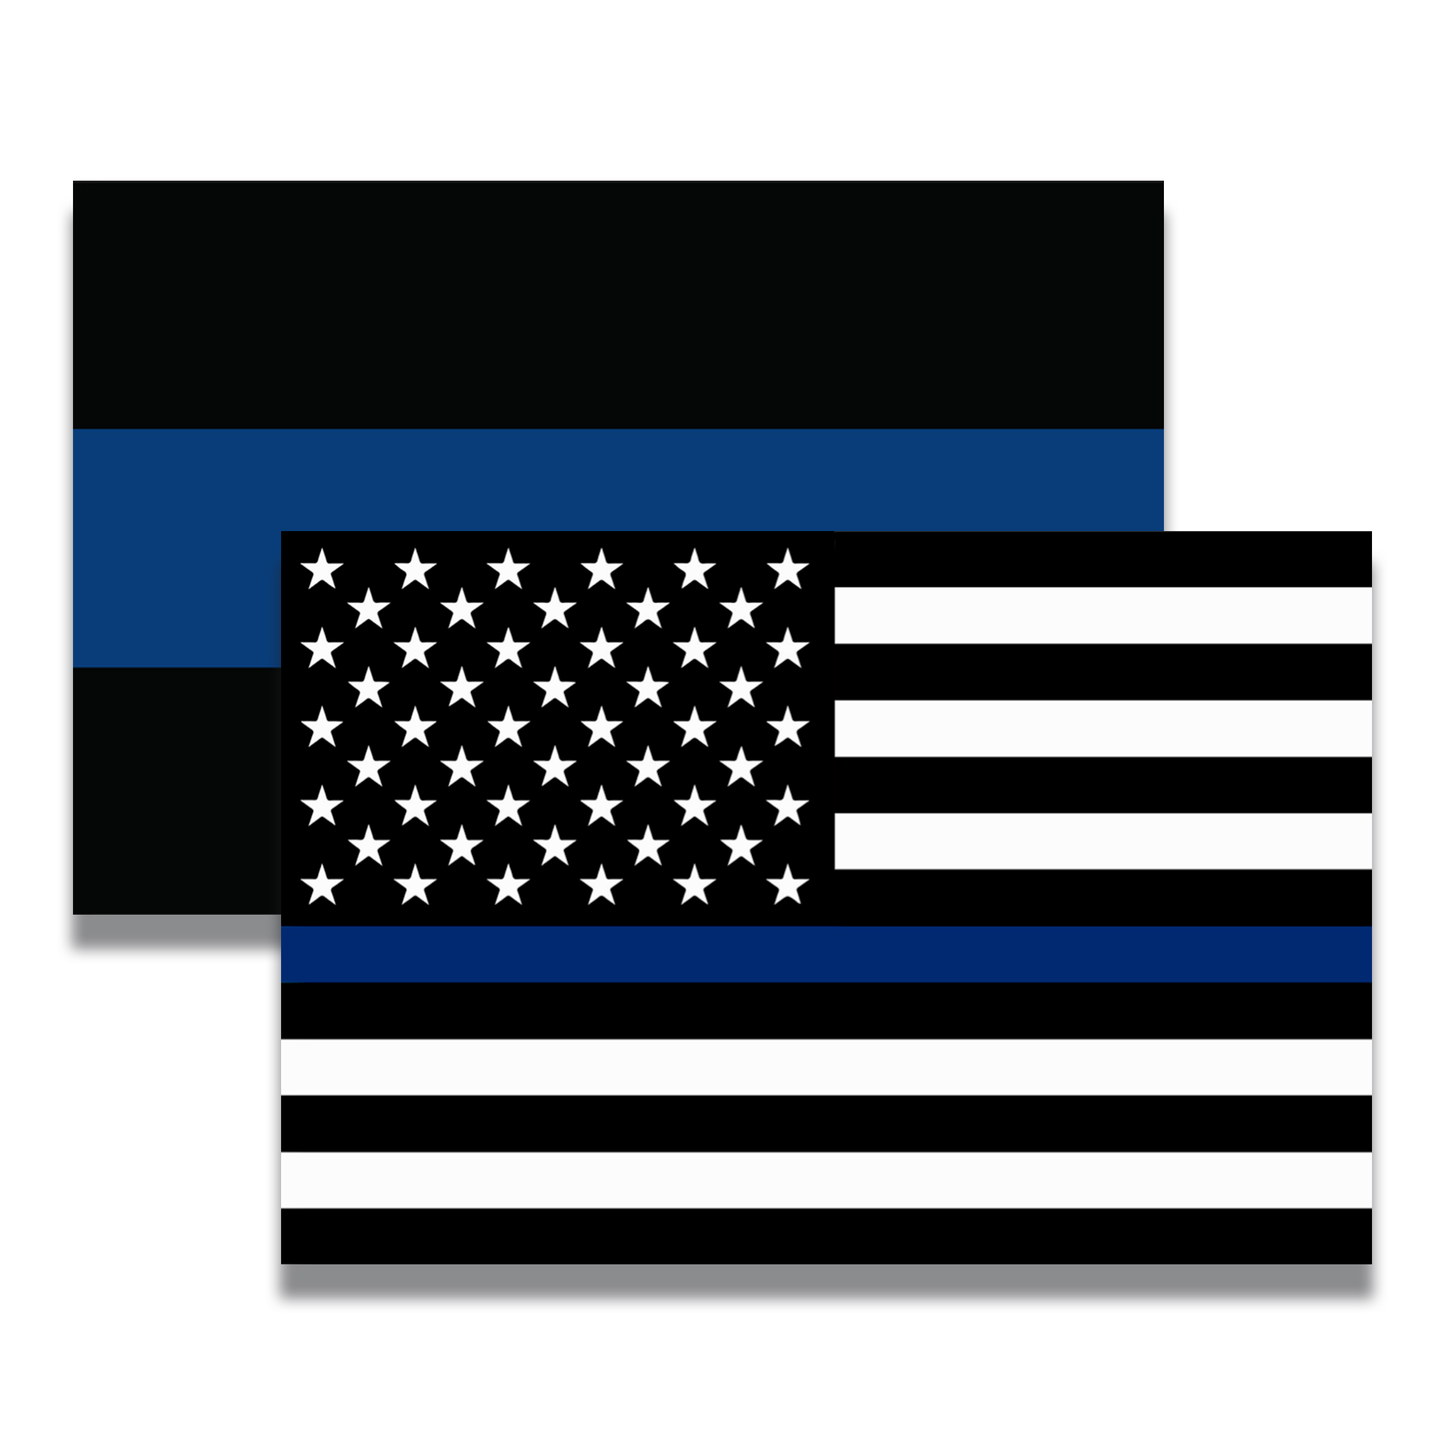 Thin Blue Line and Thin Blue Line American Flag Magnet Decal 4x6 - Heavy Duty for Car Truck SUV - 2 Pack - In Support of Police and Law Enforcement Officers …